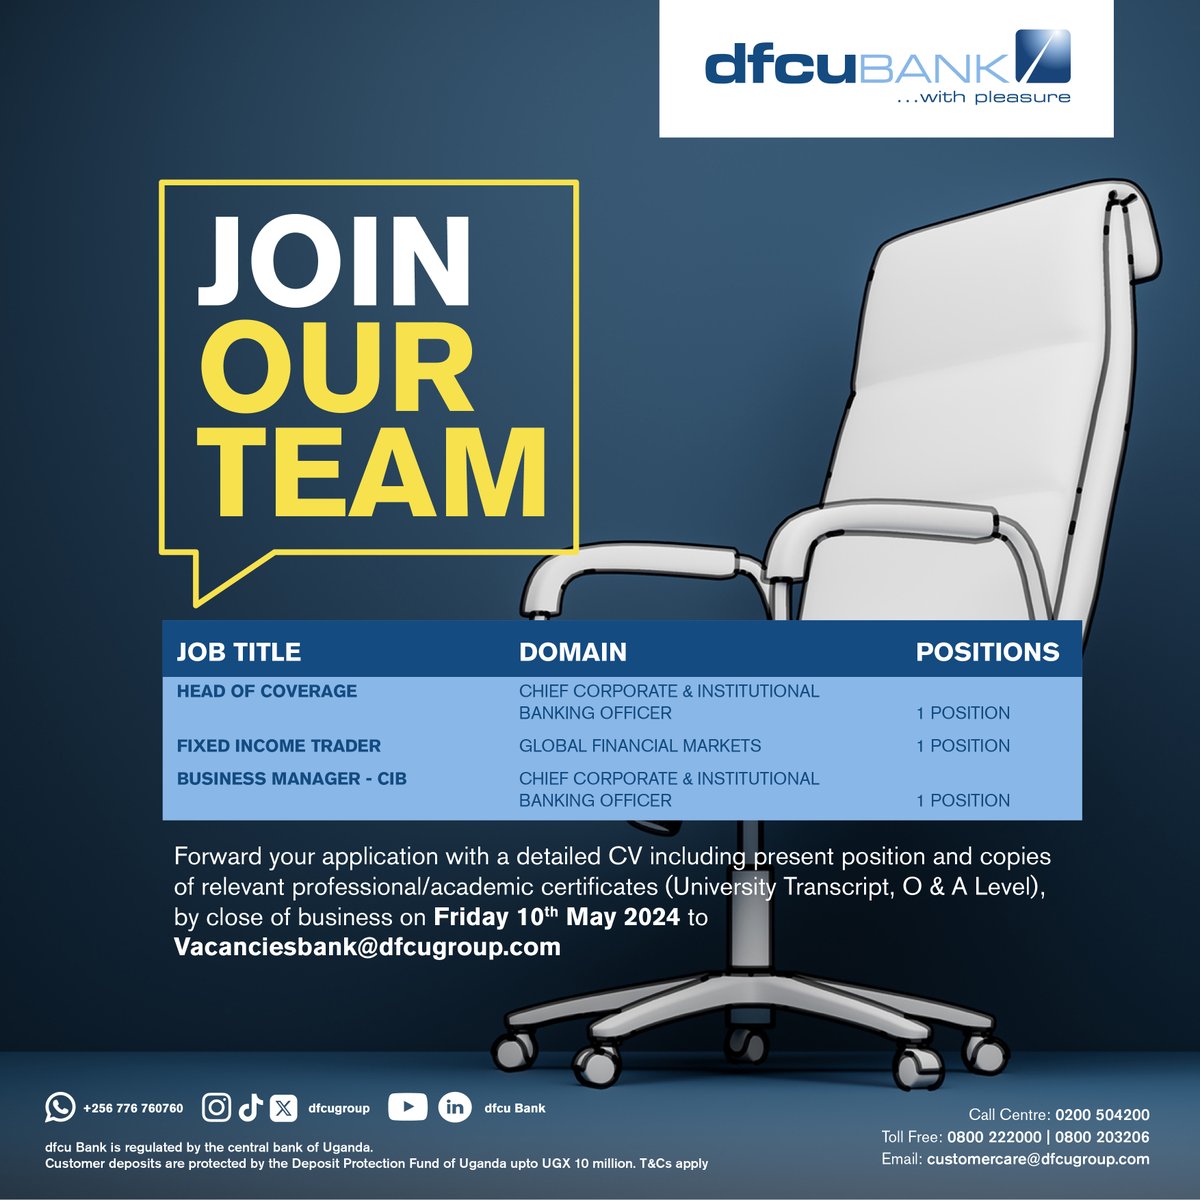 We are currently seeking candidates to join our team. For further details on the application process, please visit dfcugroup.com/careers/. #dfcuJobs